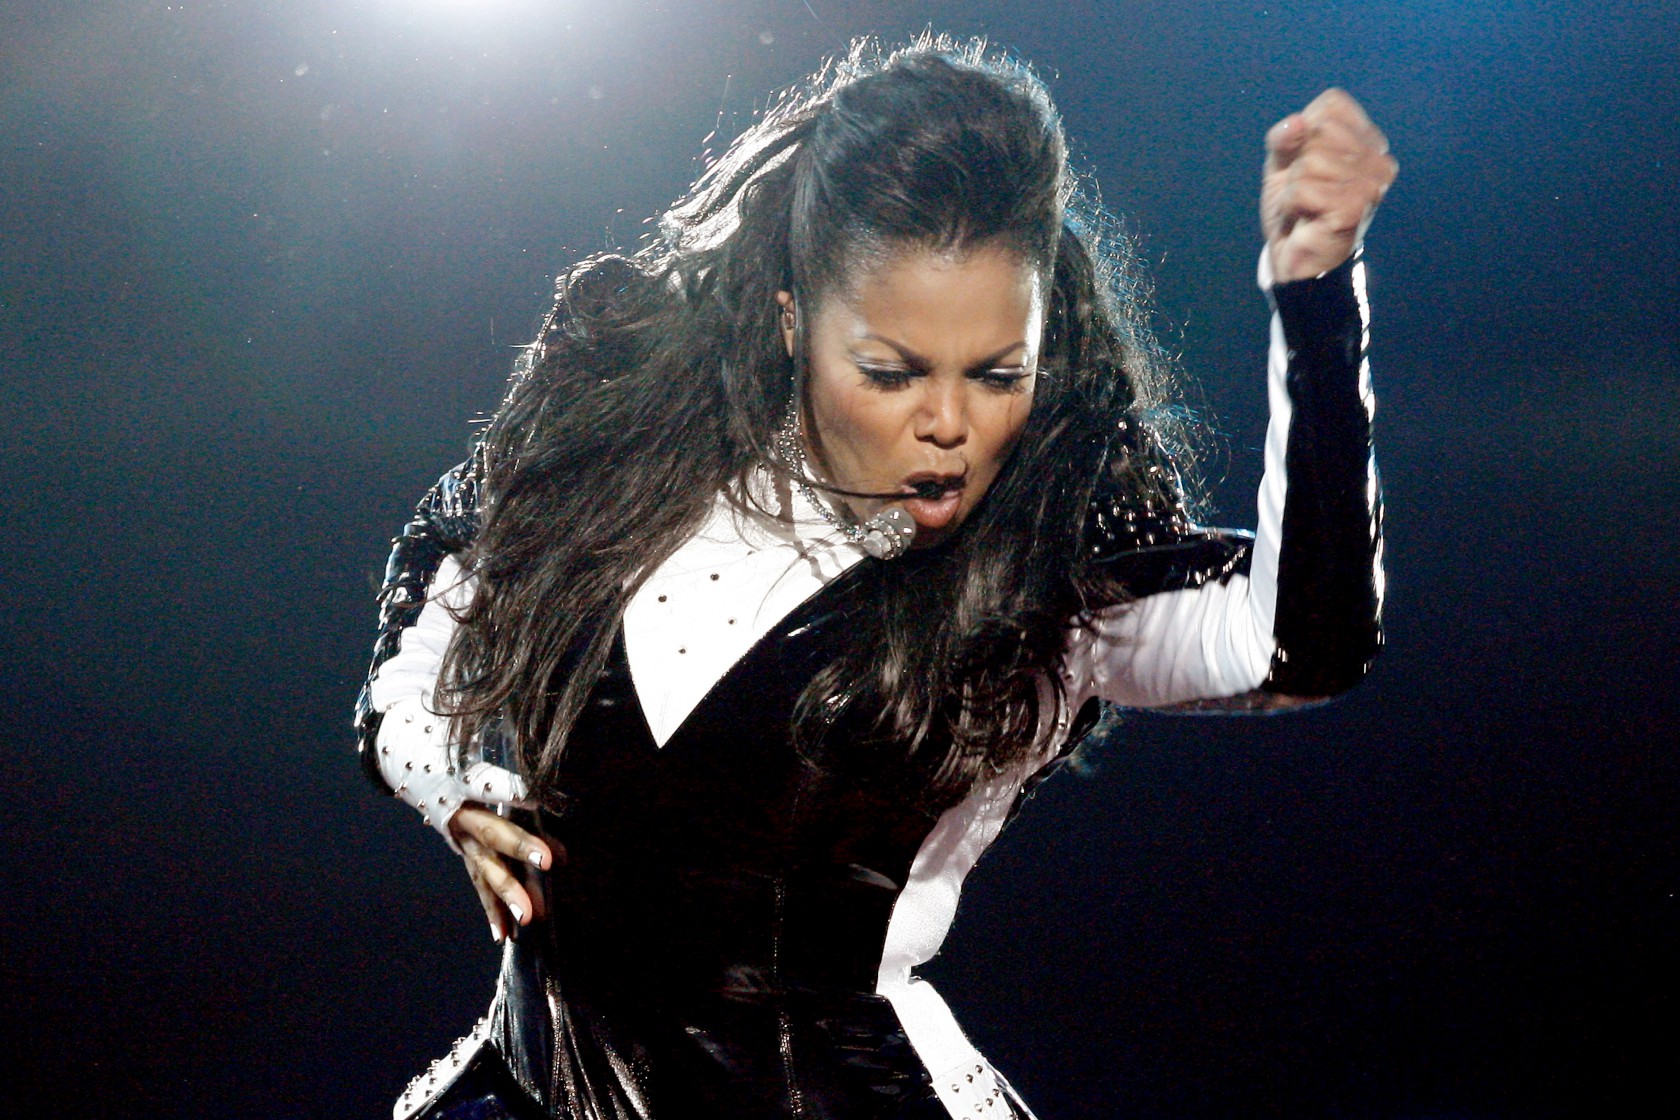 meet and greet janet jackson unbreakable tour